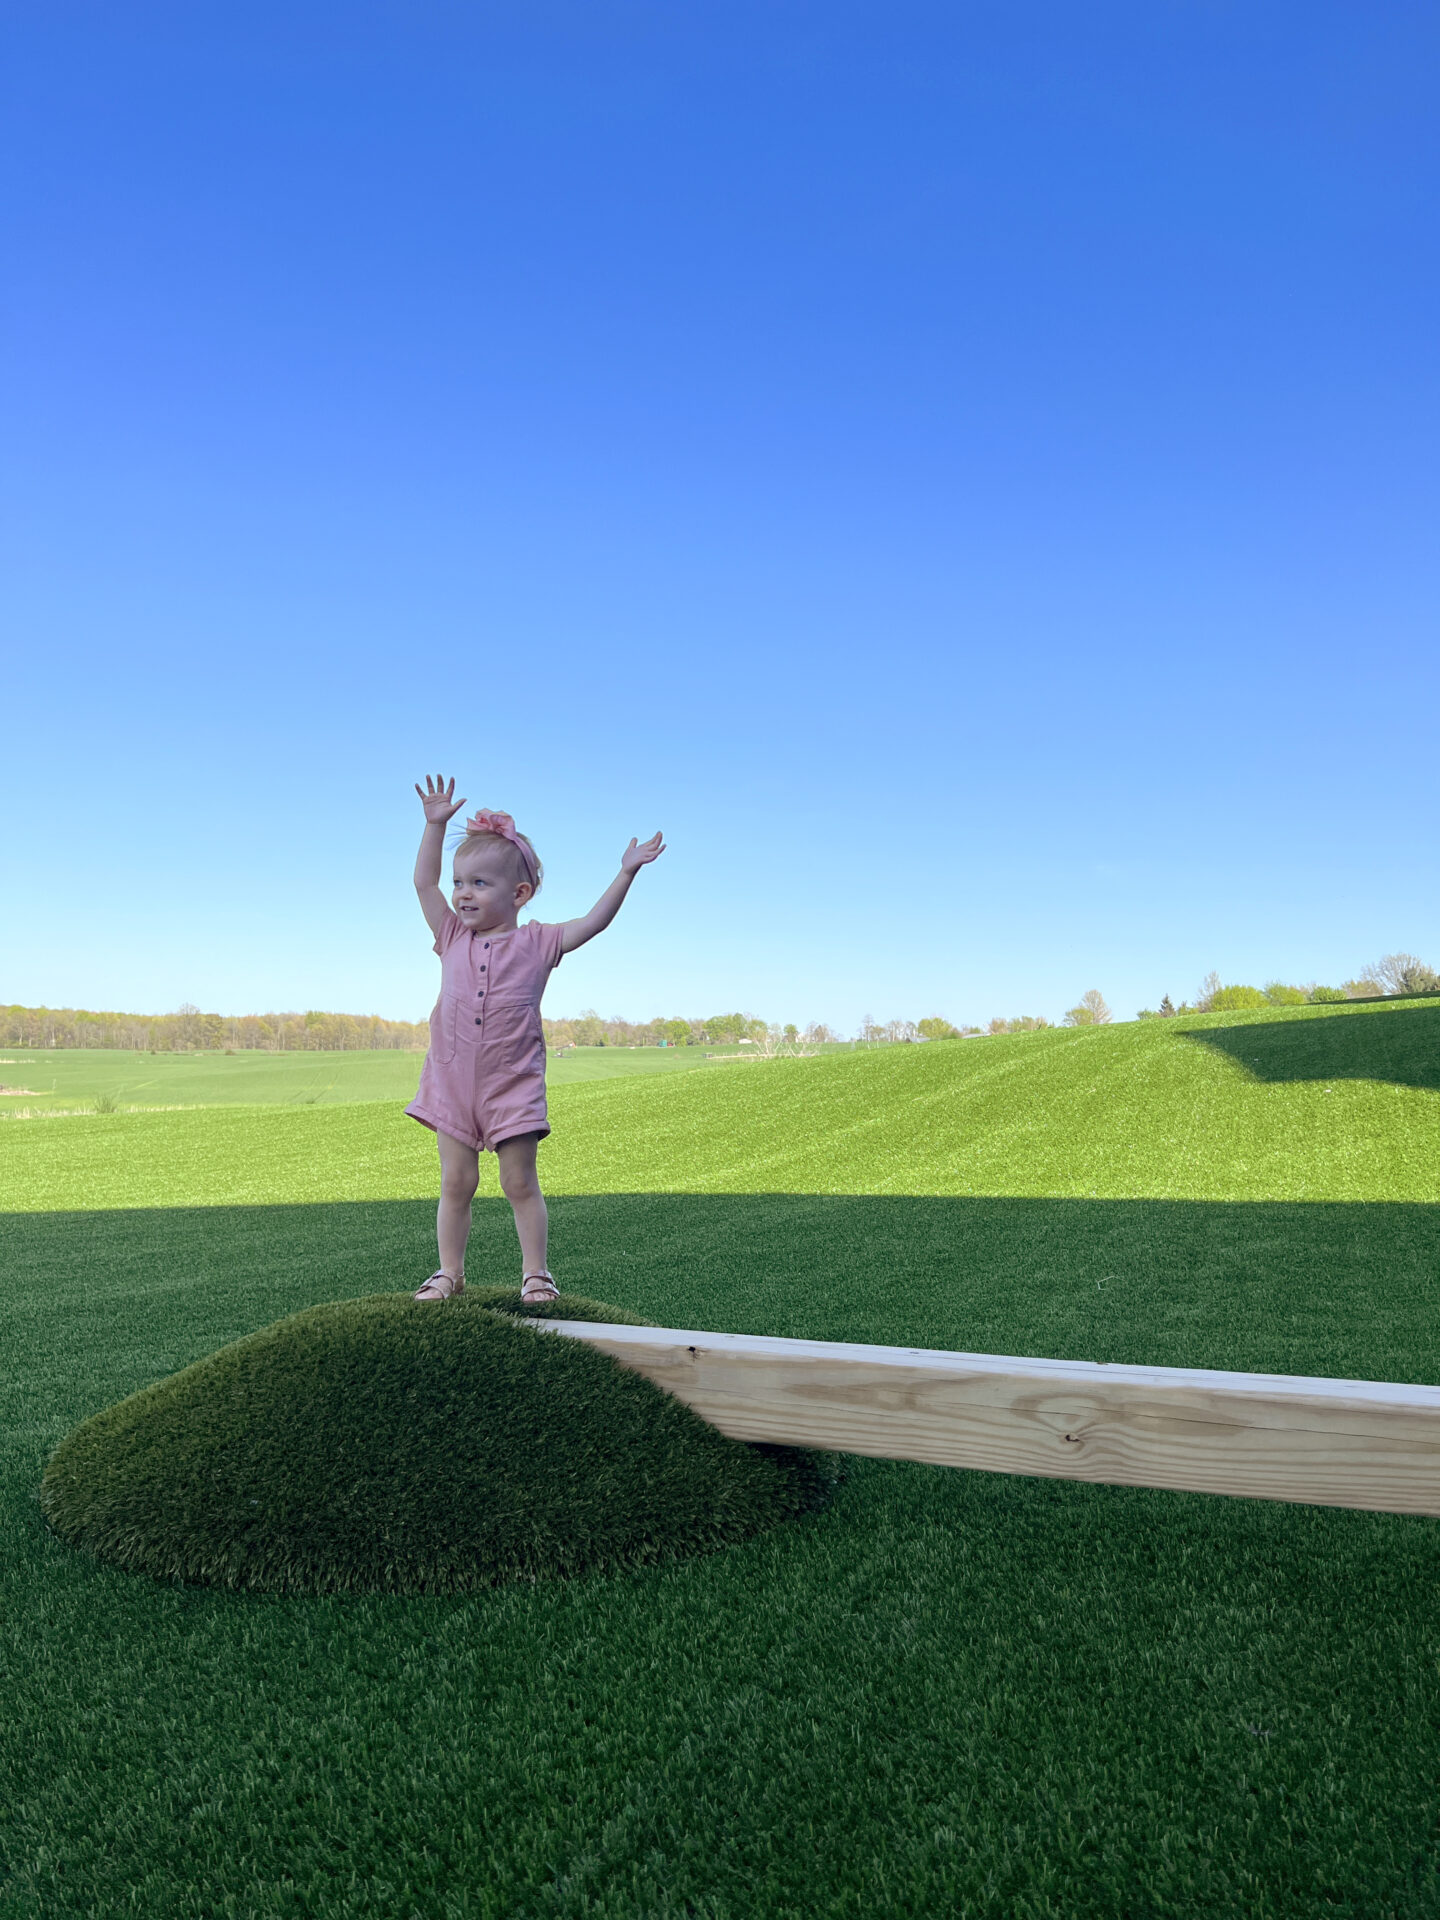 A child stands on an artificial turf hill against a blue sky, arms raised high, wearing a pink dress and sandals, expressing joy.